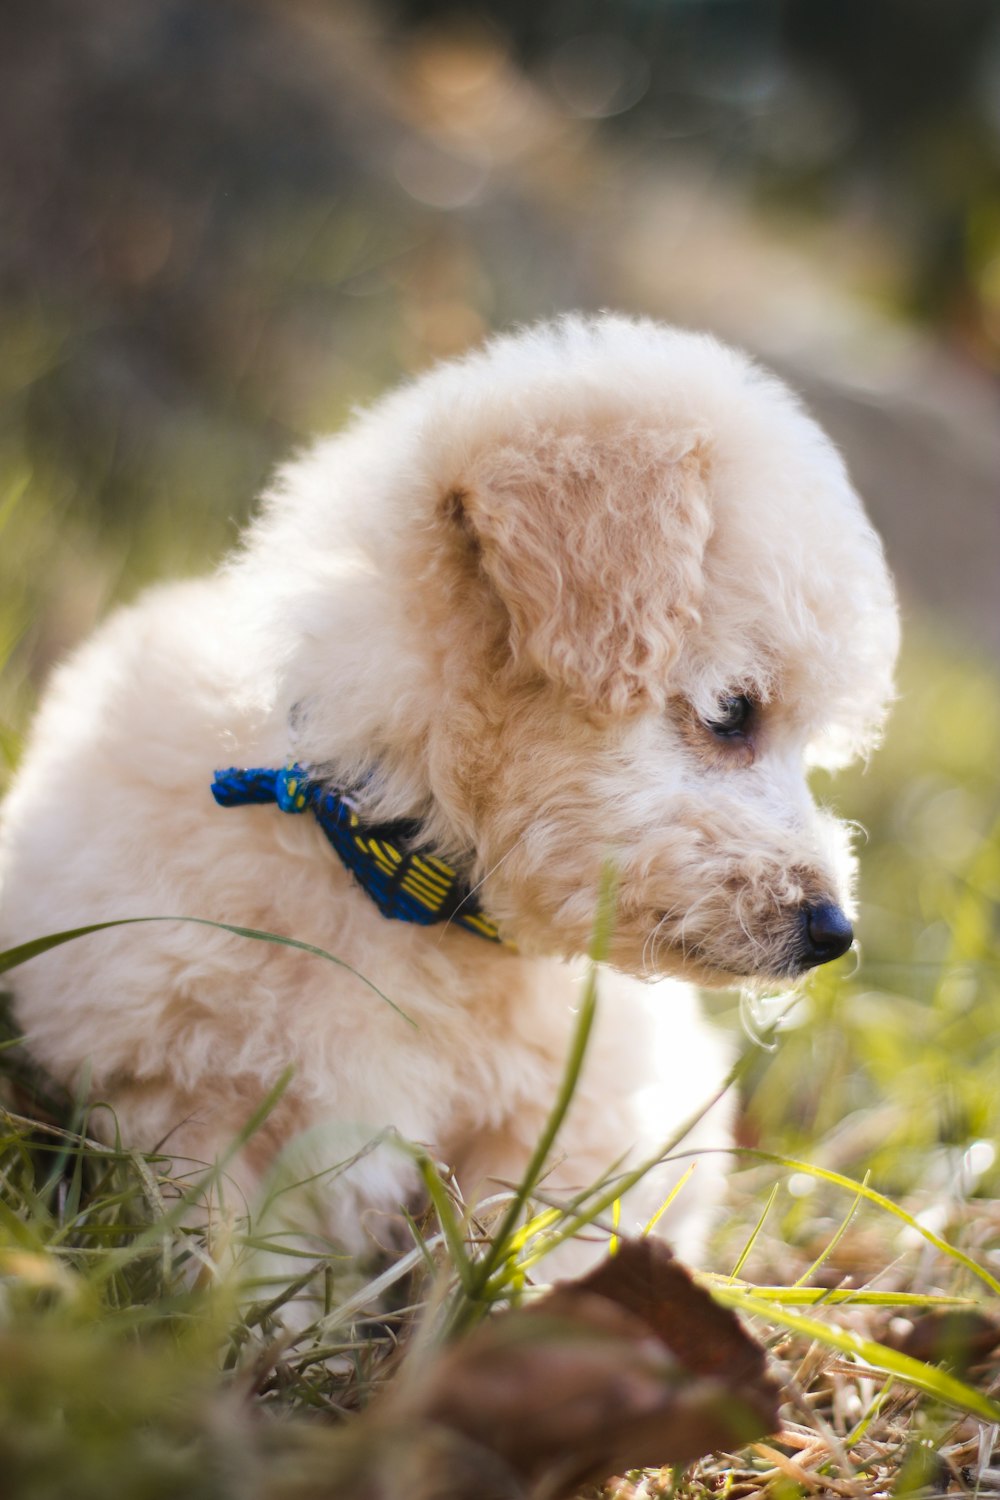 close up photography of white medium-coated puppy standing on grass field at daytime